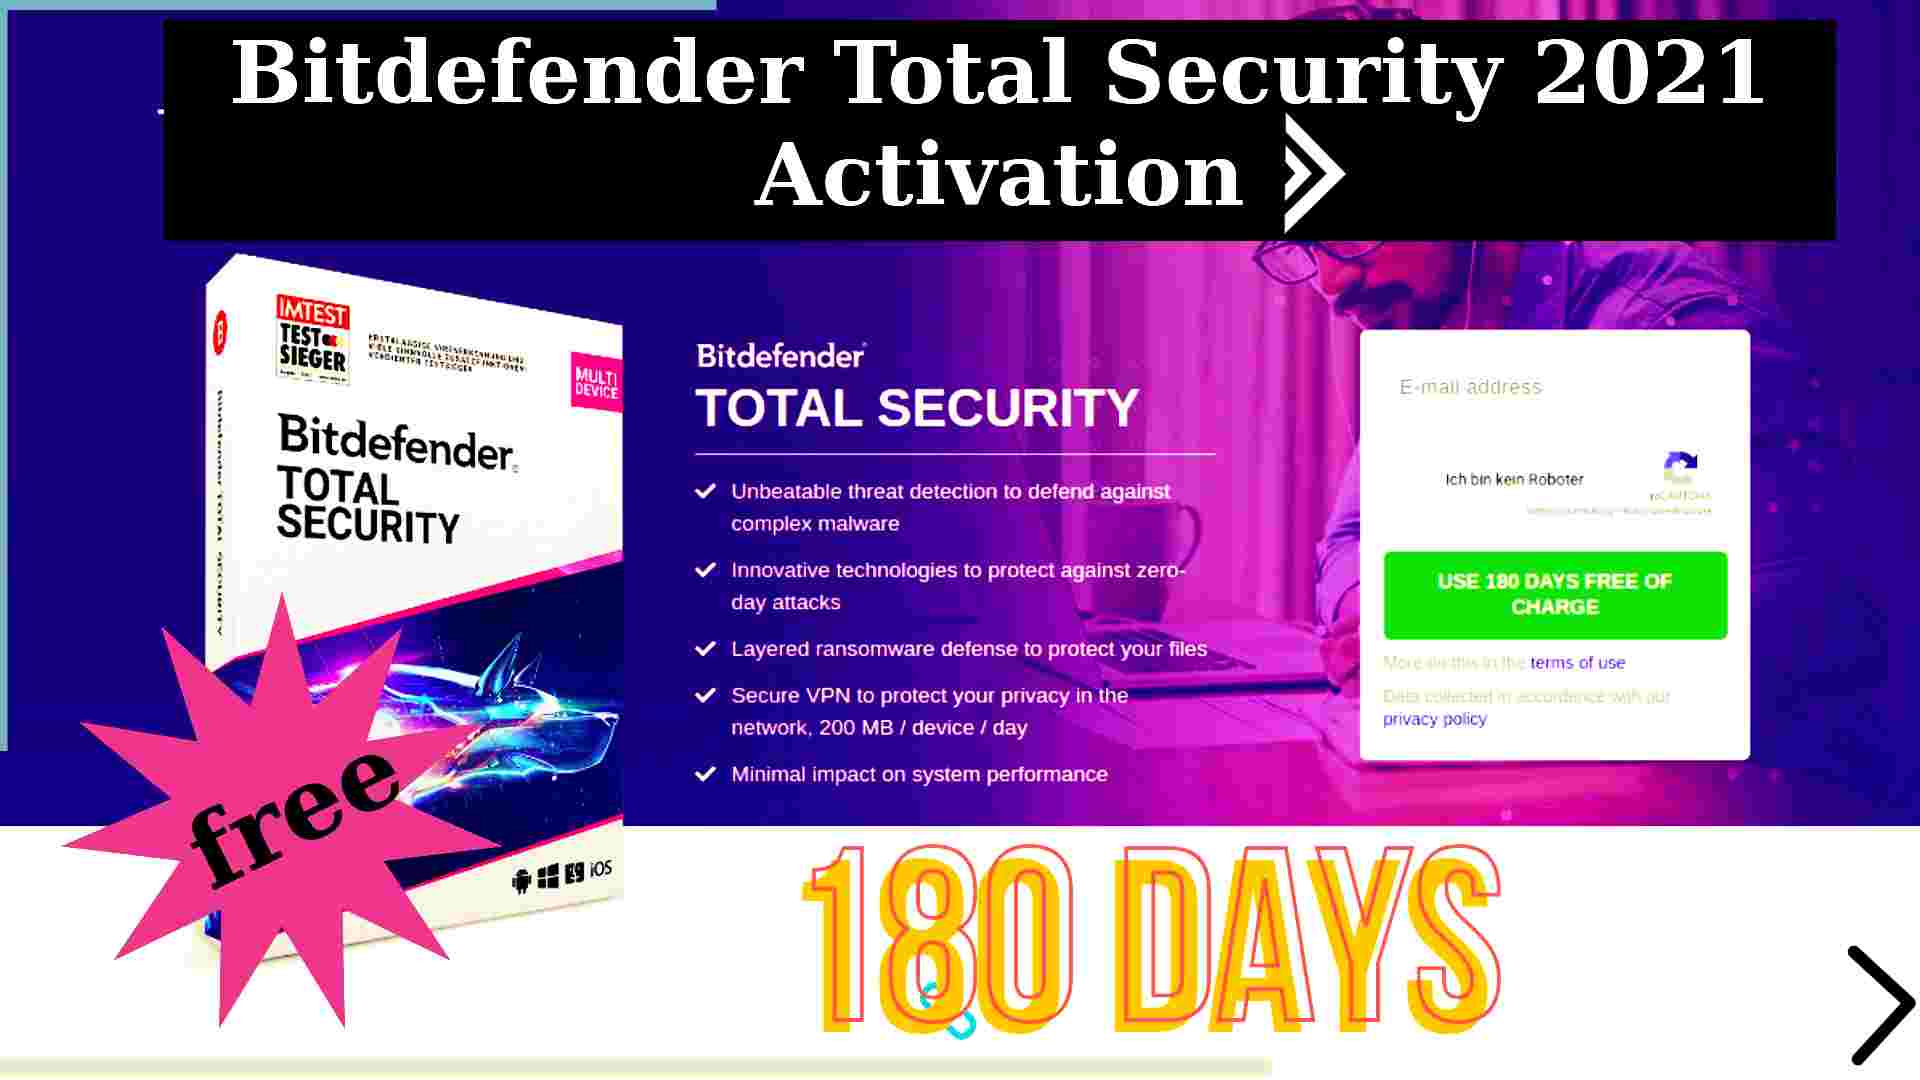 August Update | Bitdefender Total Security 2021 Activation 180 days free